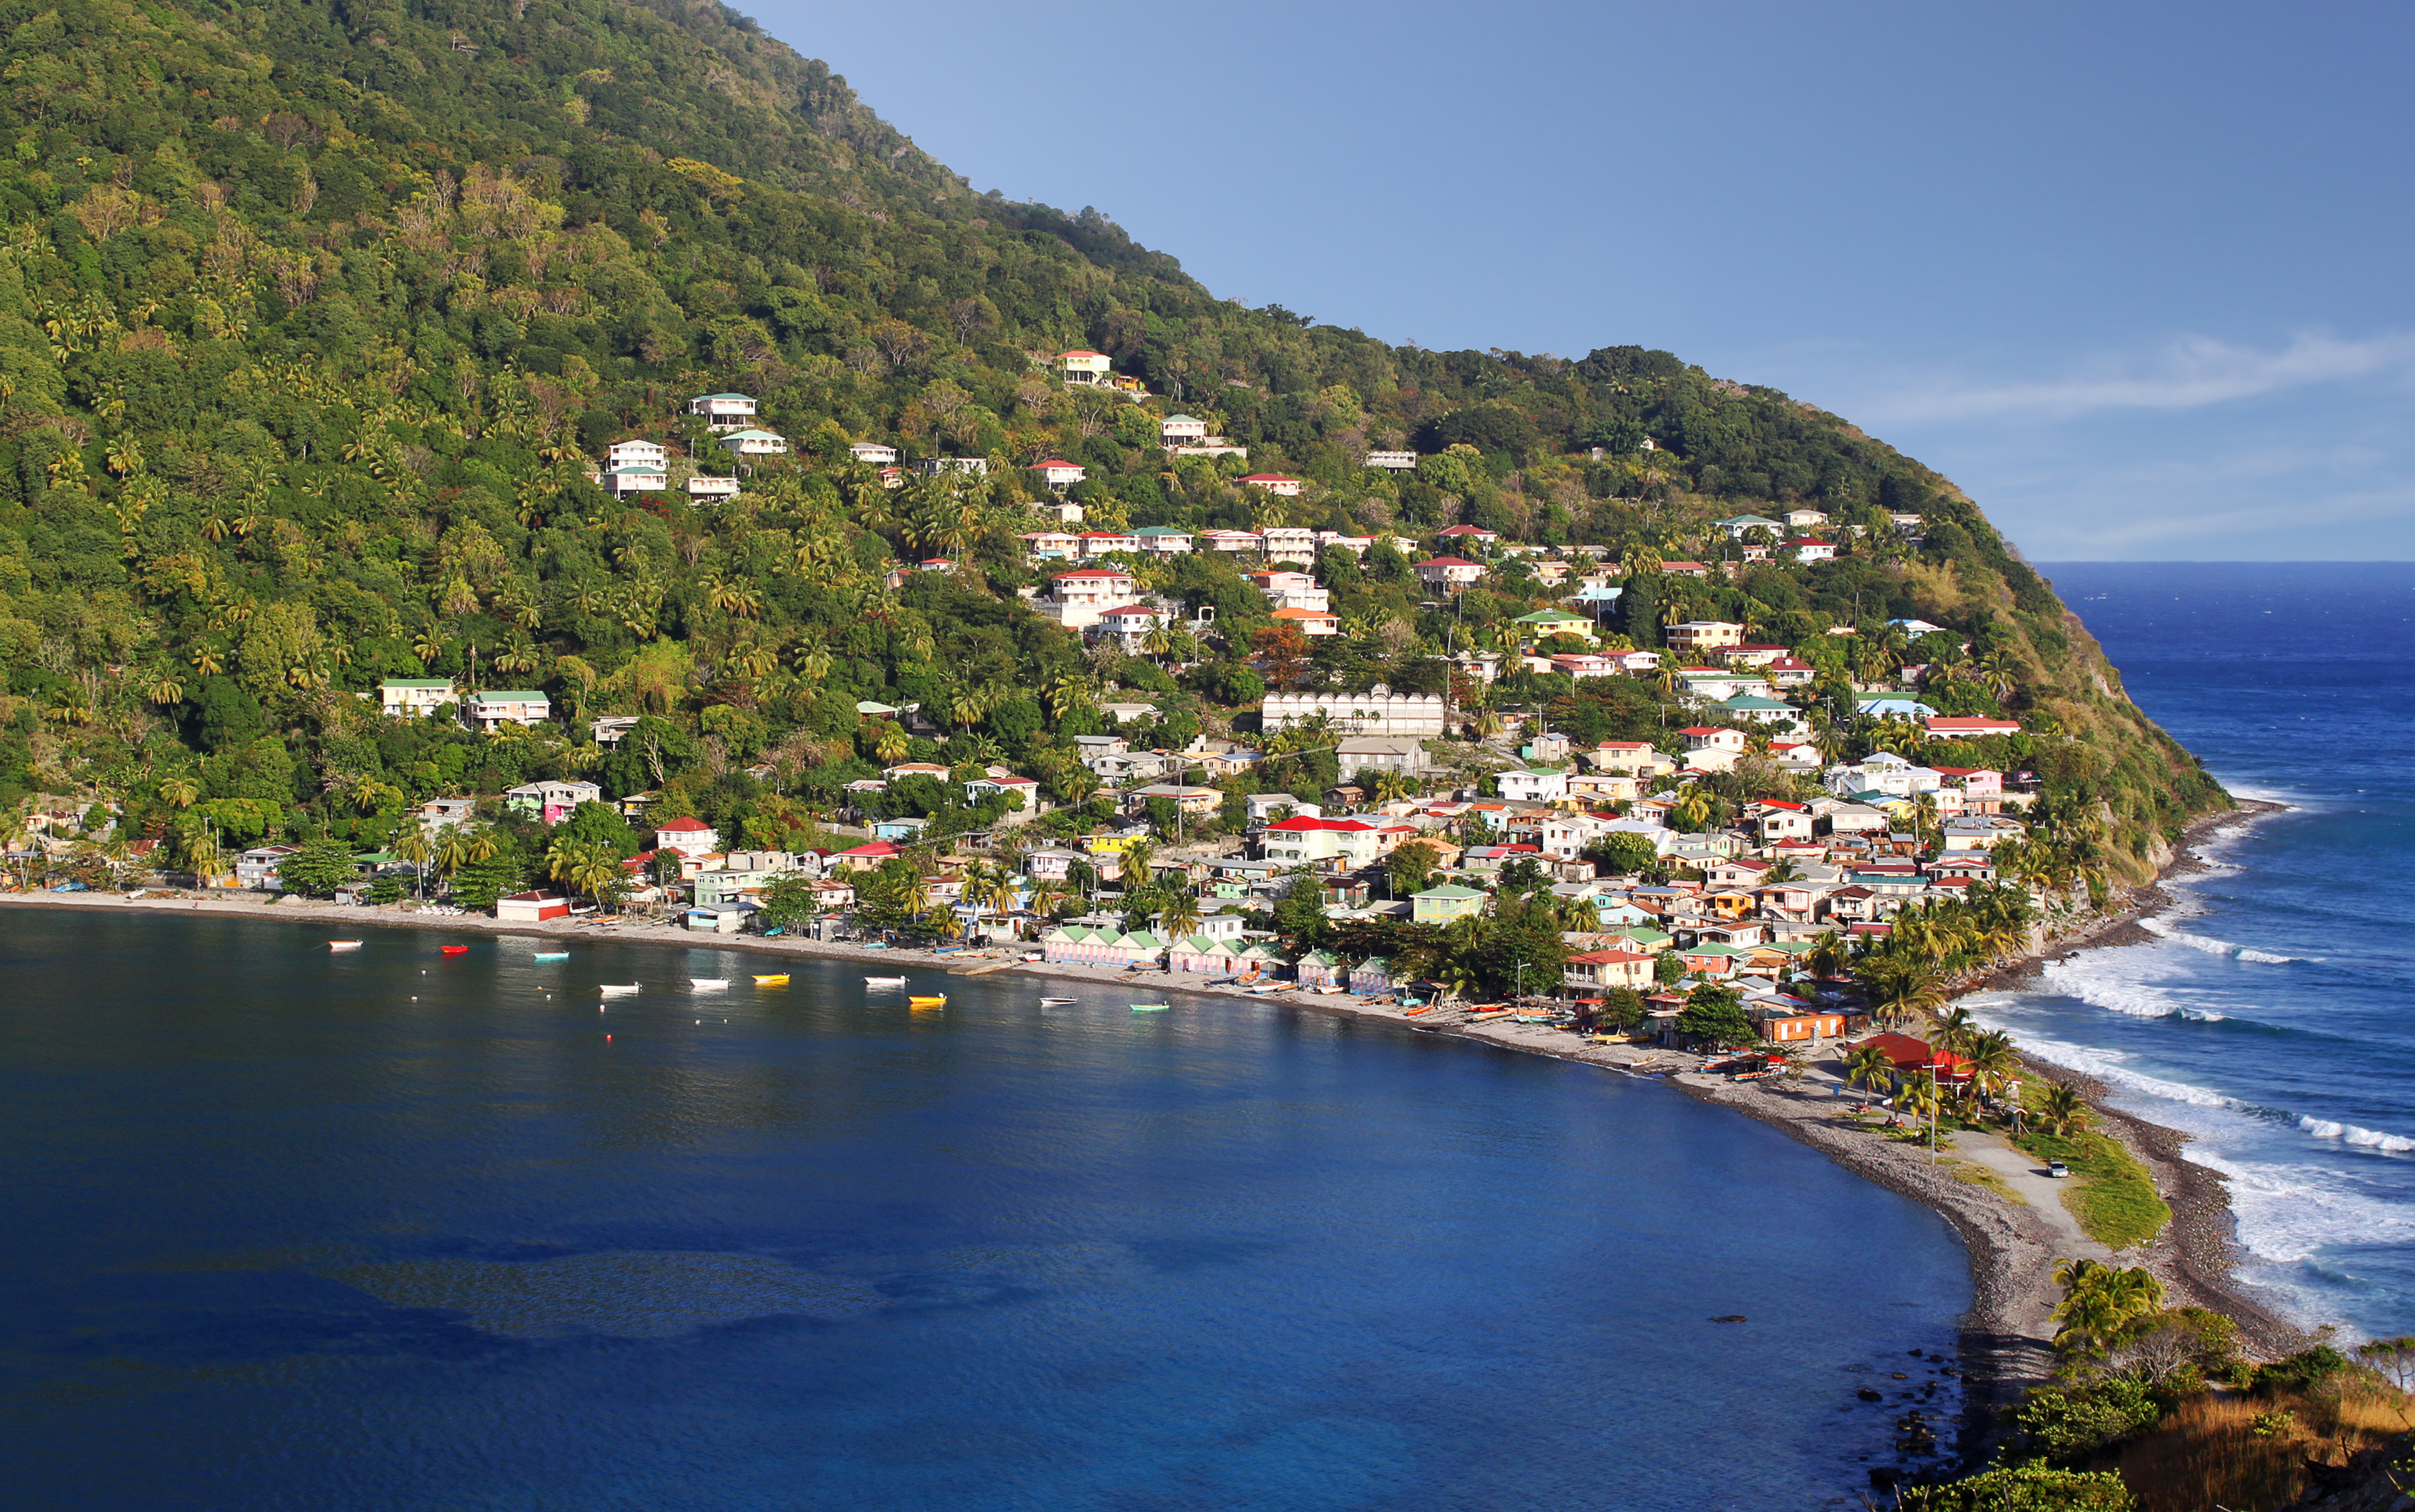 A view of the Caribbean island Dominica